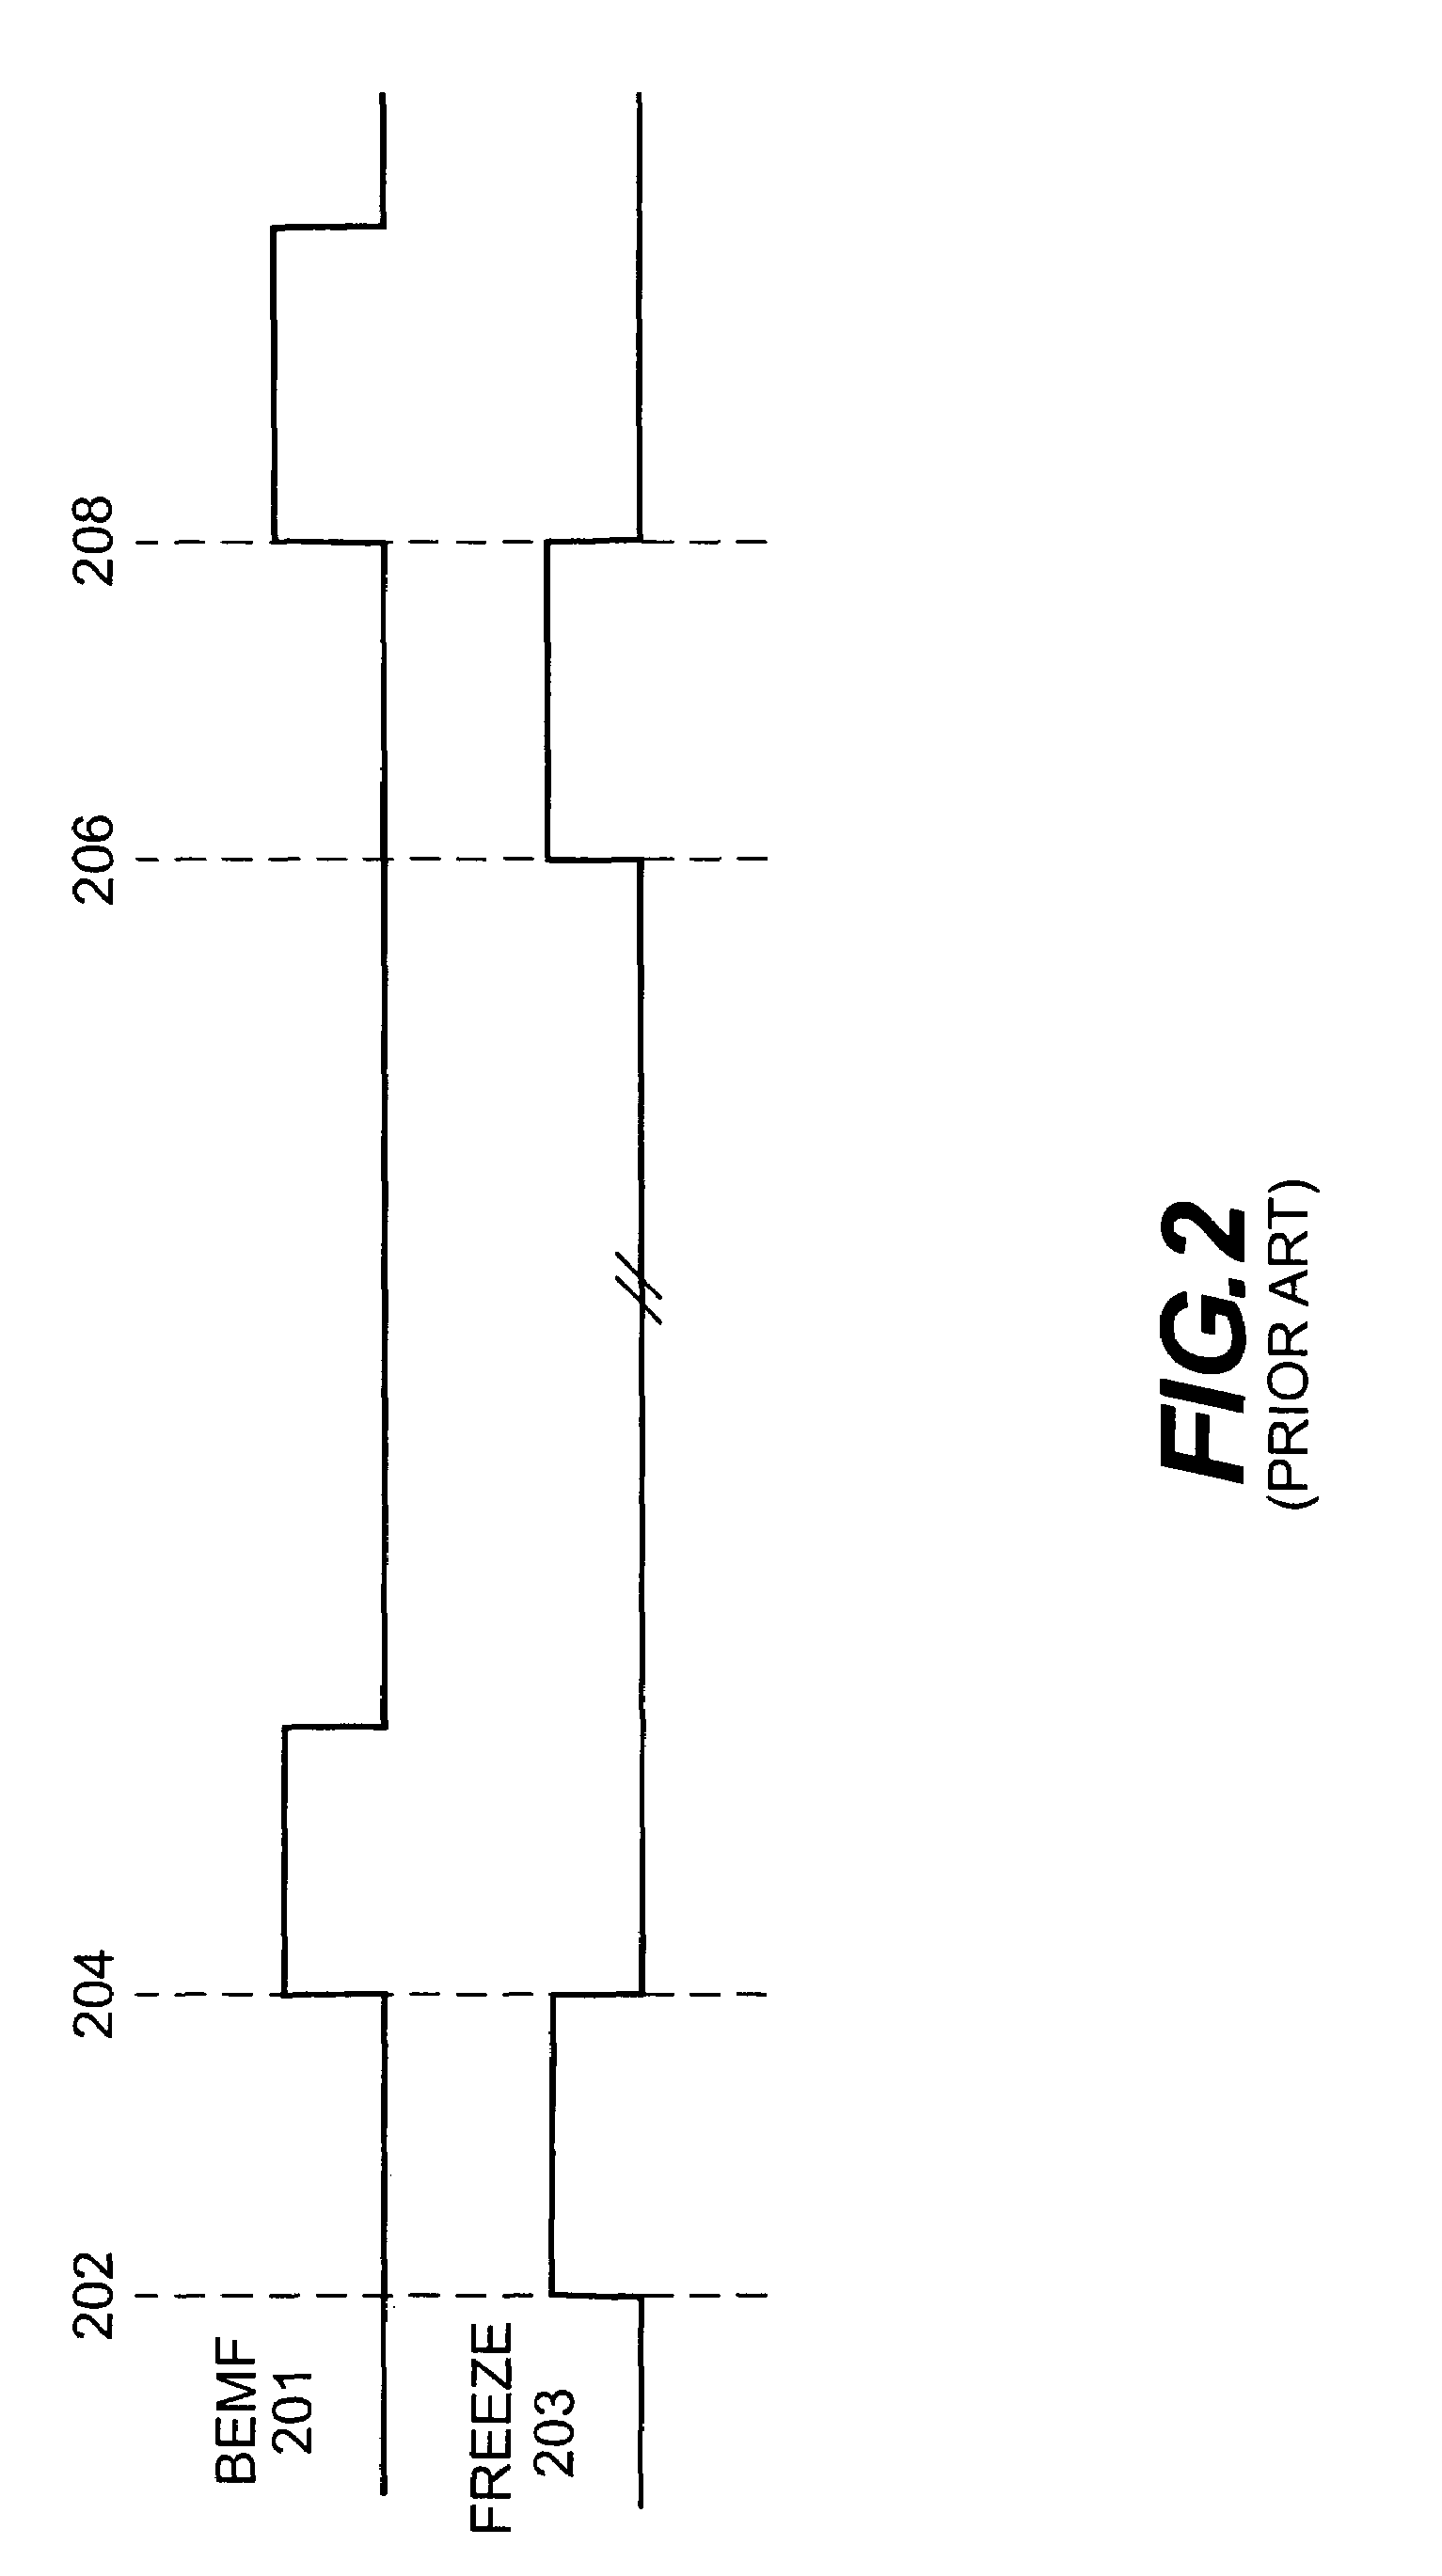 System and method for detecting back electromotive force with automatic pole calibration